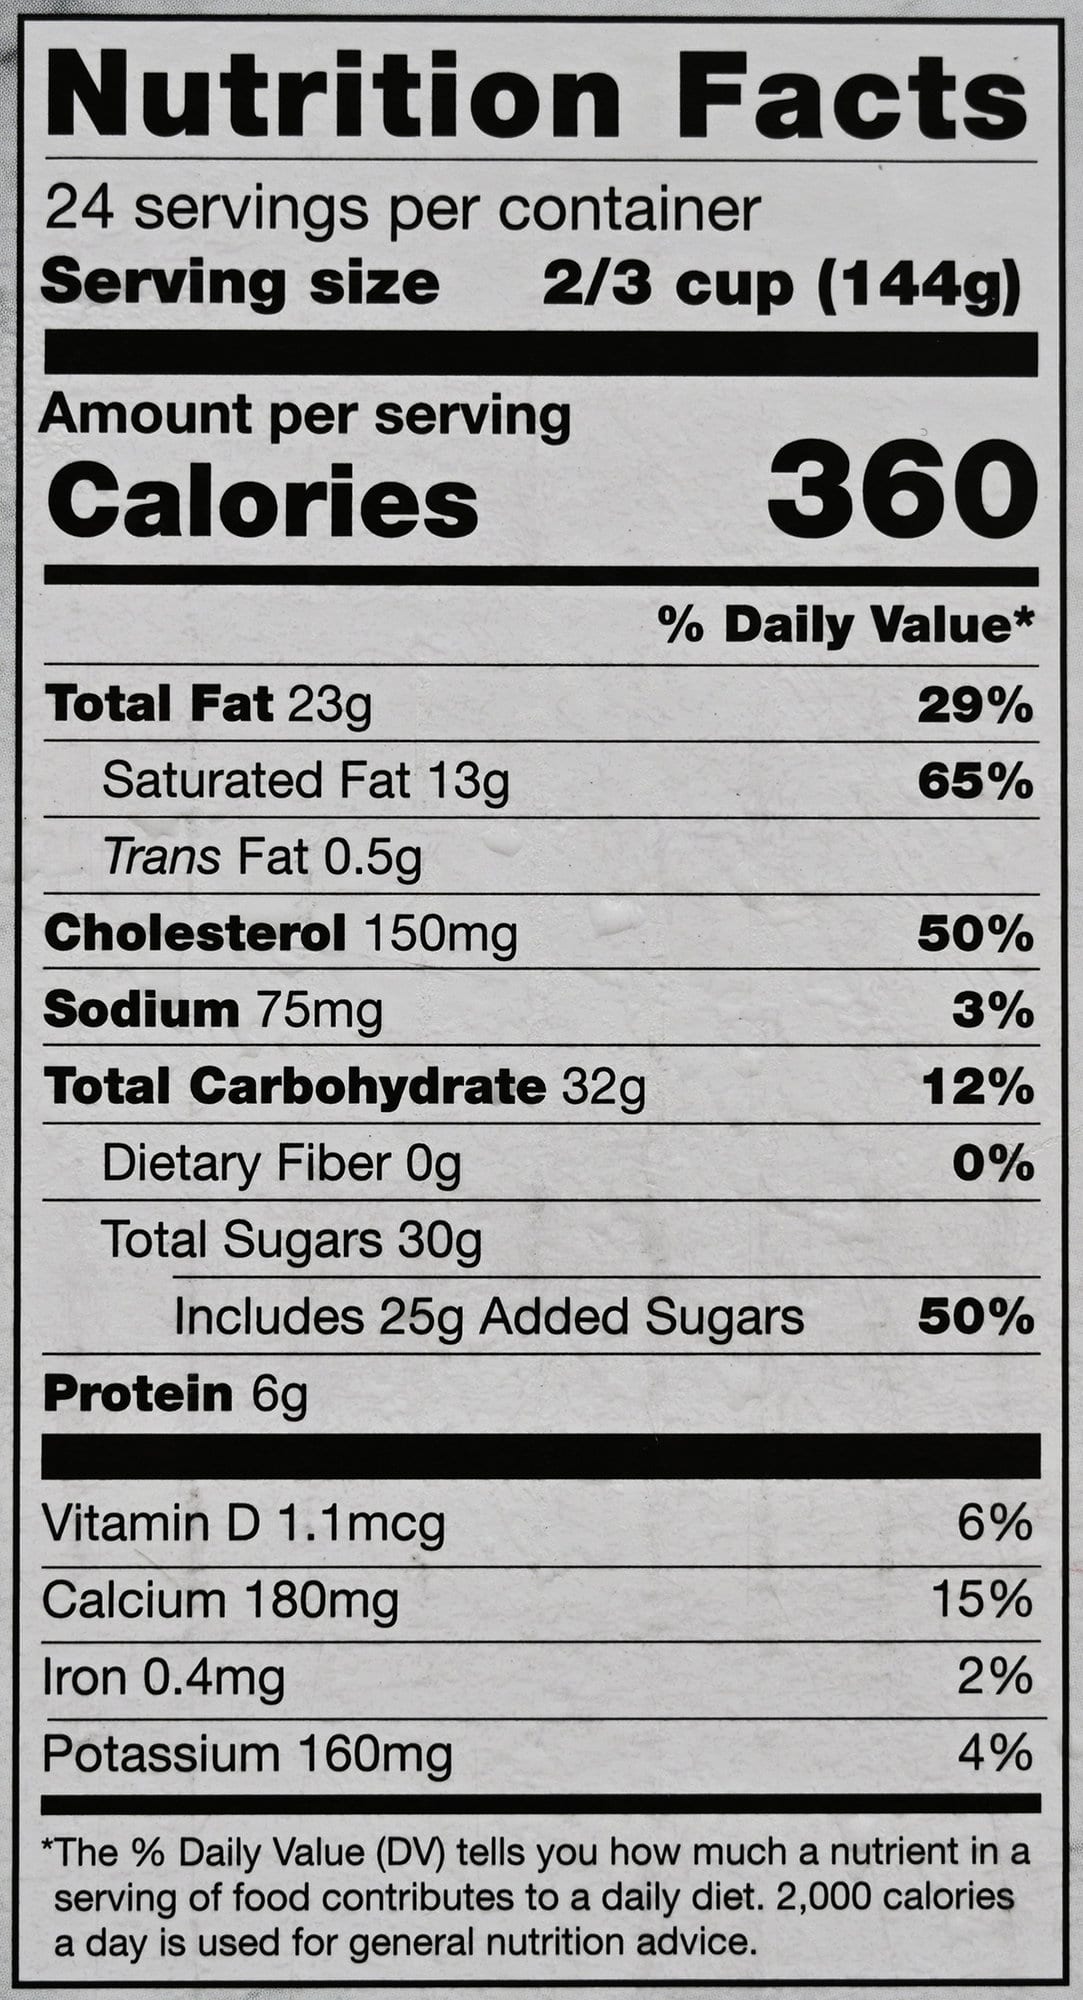 Image of the vanilla ice cream nutrition facts from the back of the container.